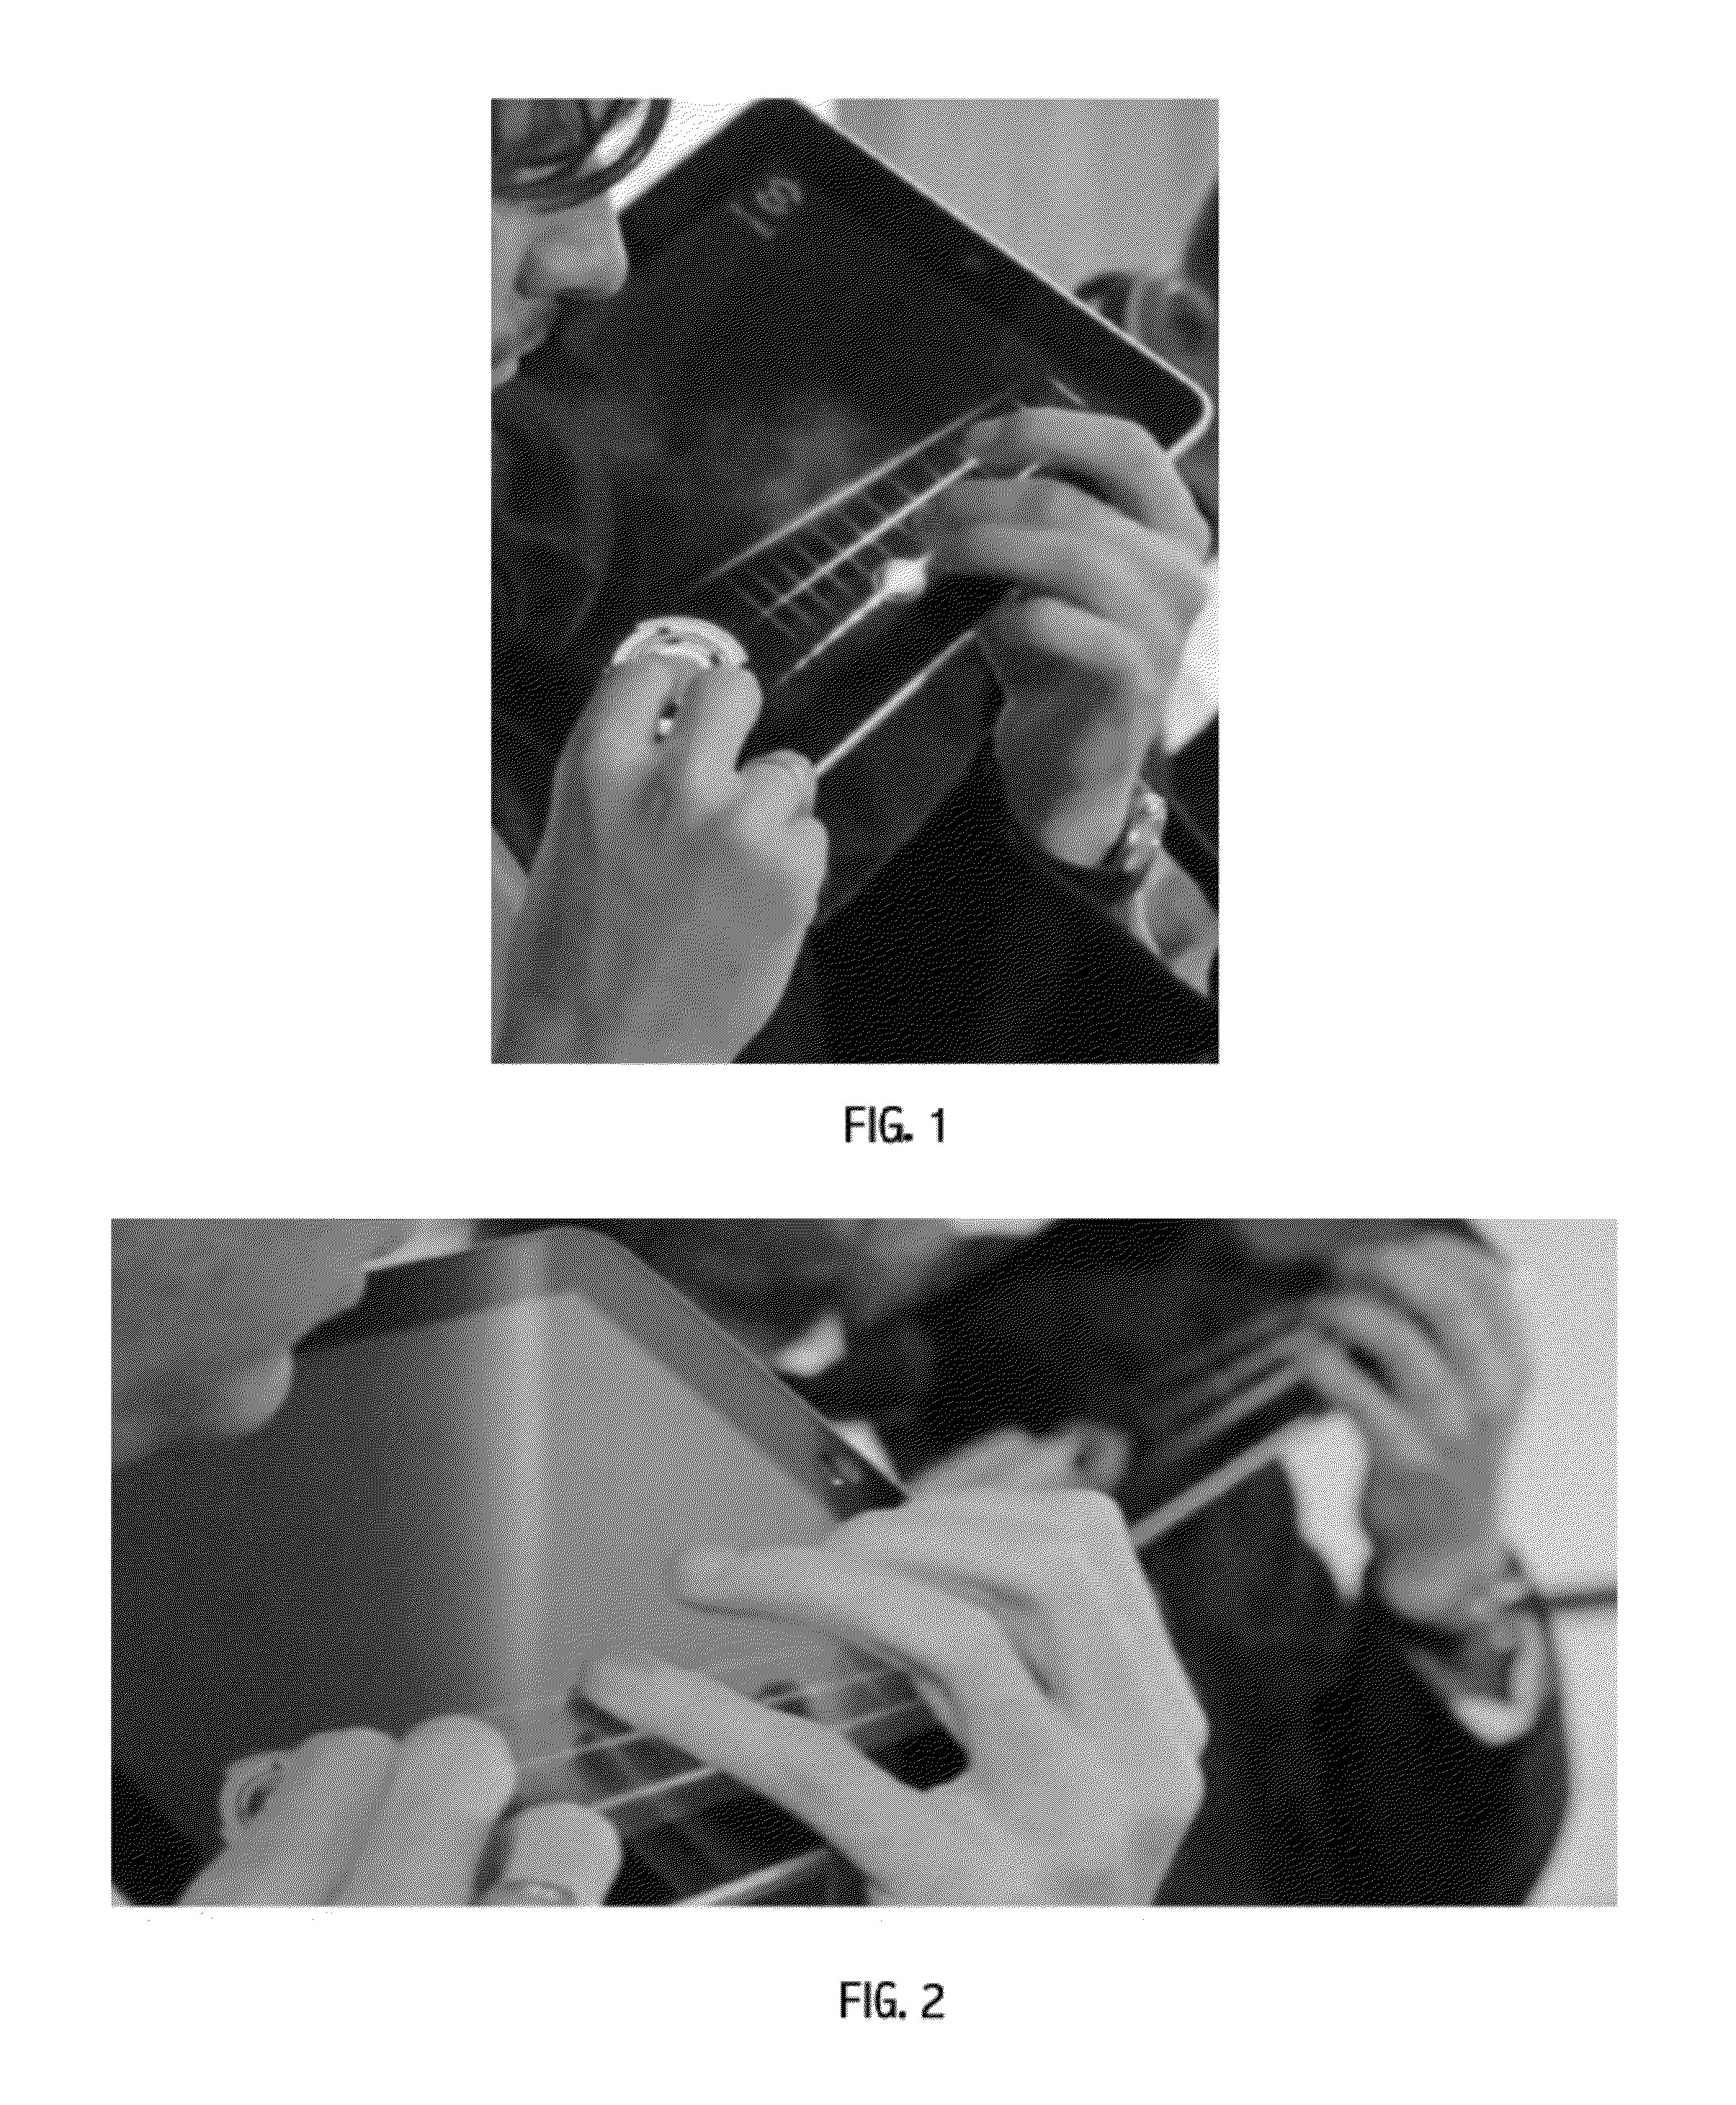 System and method for capture and rendering of performance on synthetic string instrument